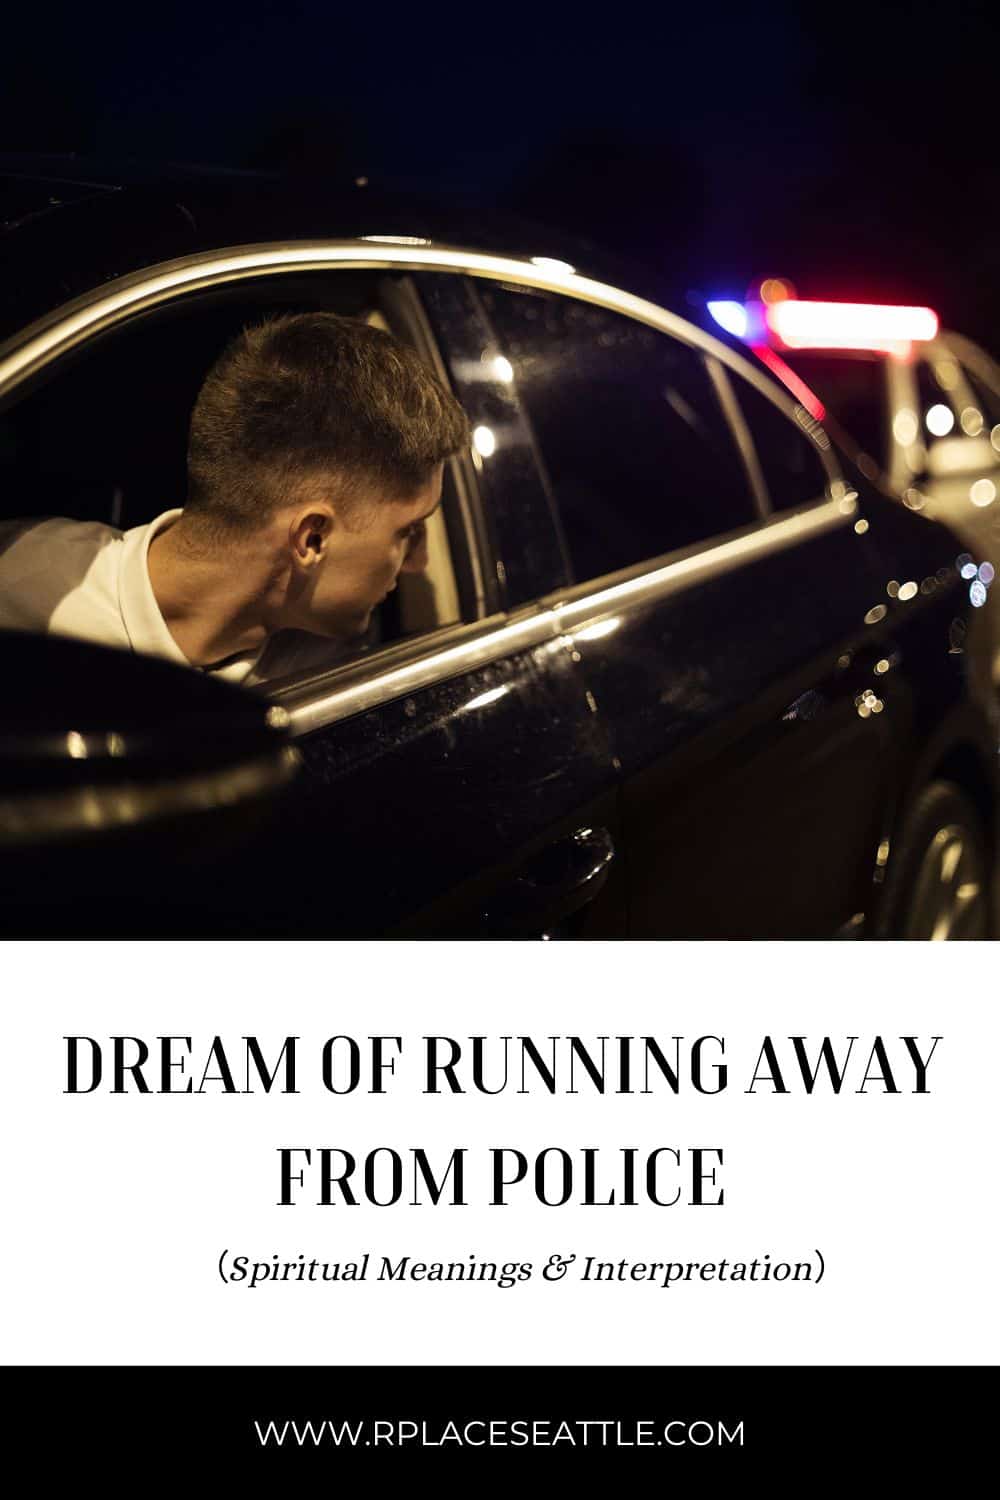 dream of running away from police meaning